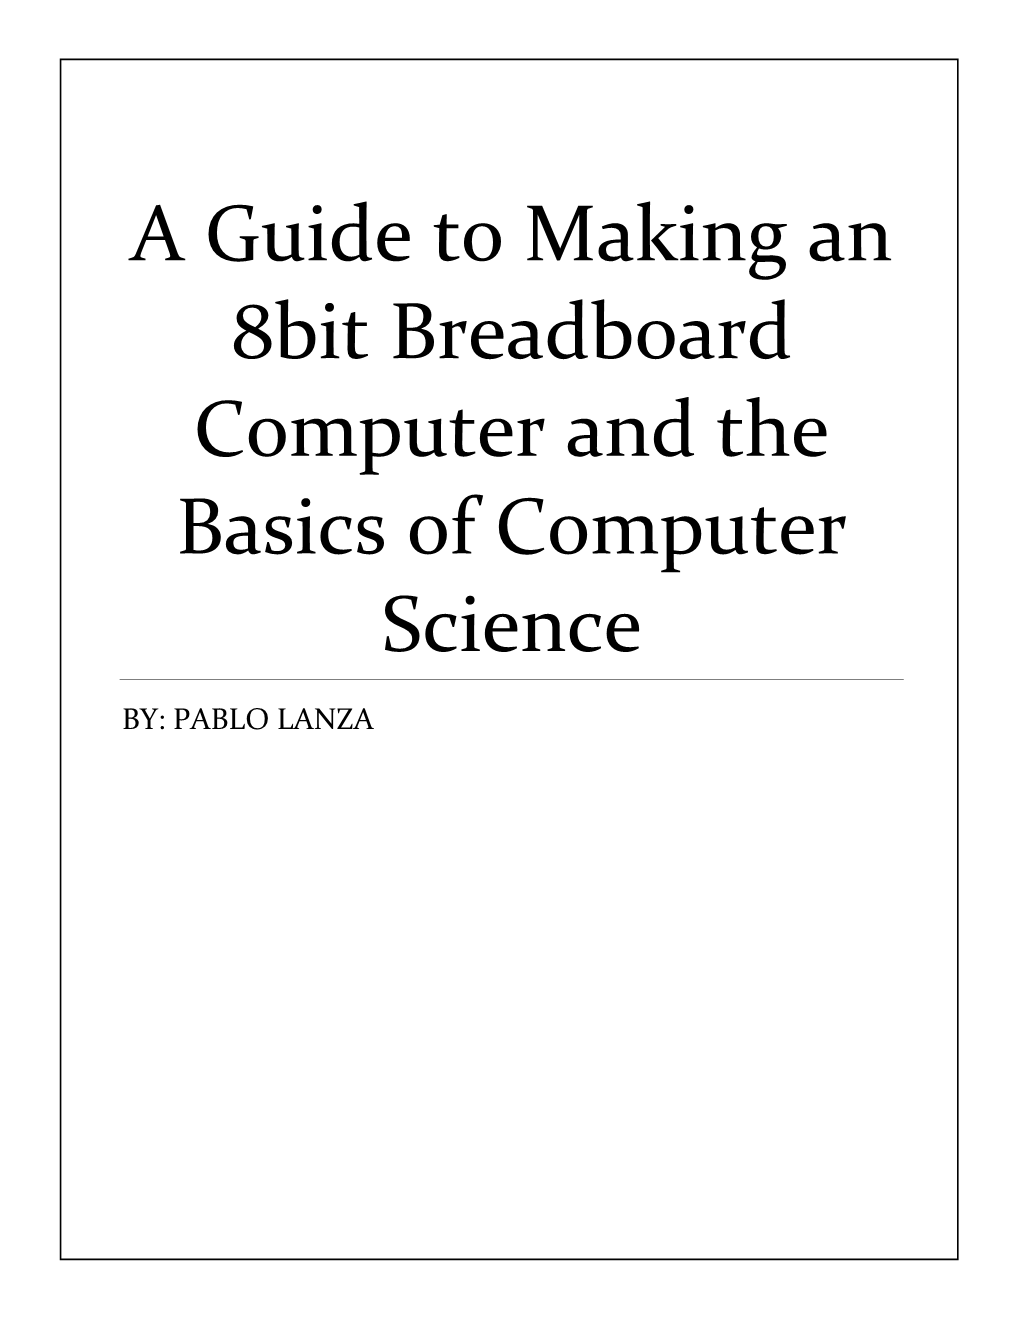 A Guide to Making an 8Bit Breadboard Computer and the Basics of Computer Science